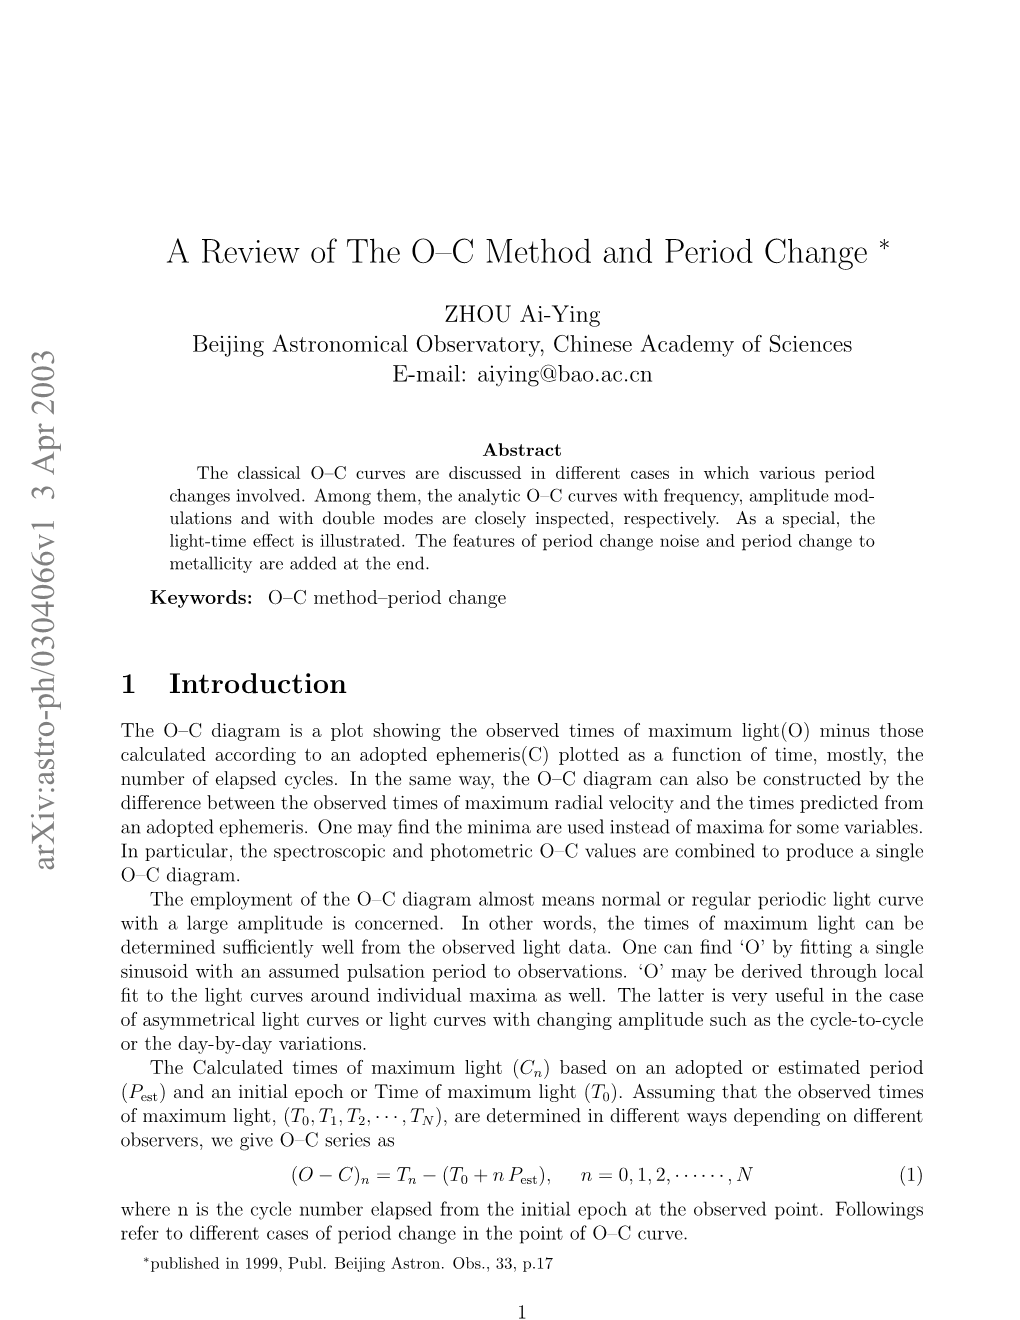 A Review of the O--C Method and Period Change